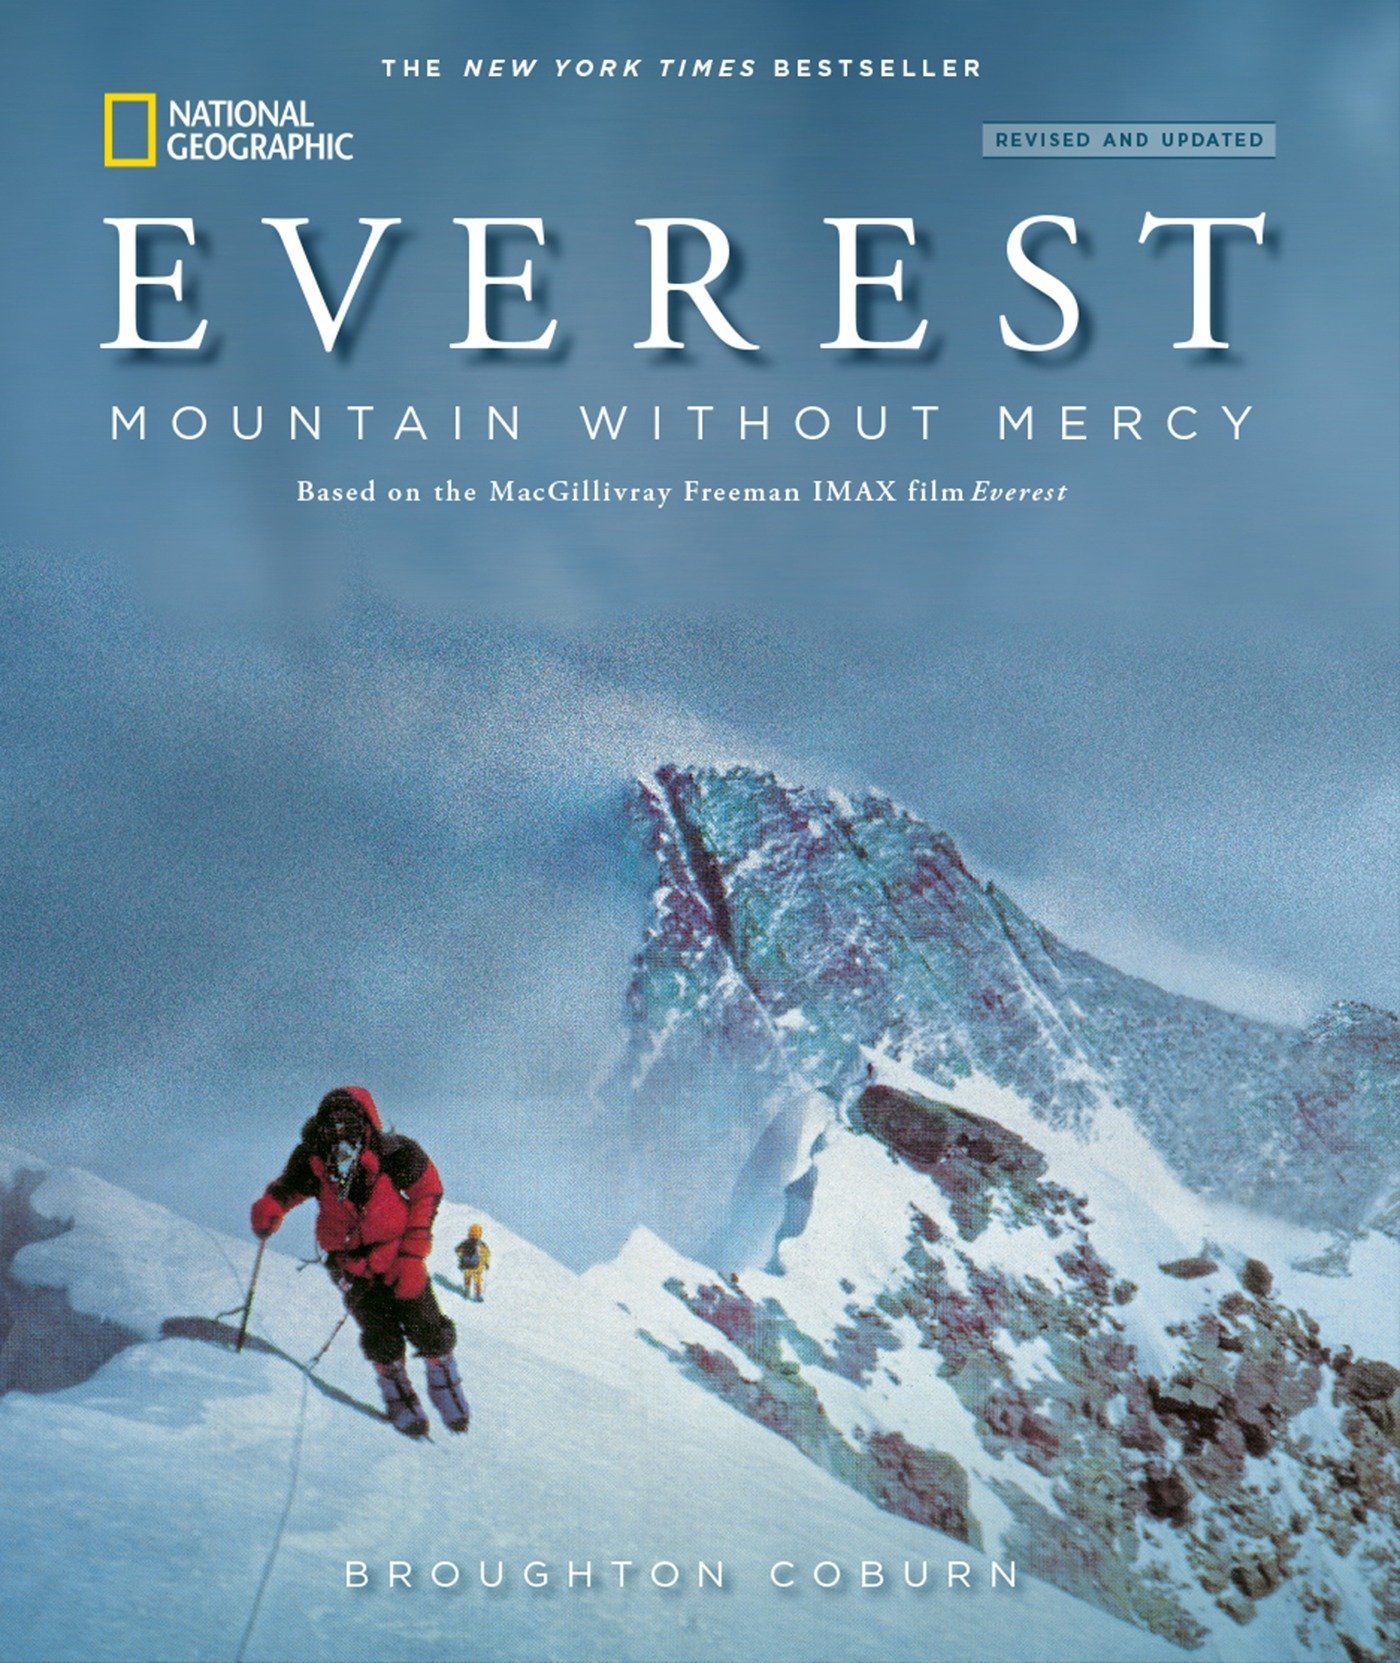 Coburn B. - Everest: Mountain Without Mercy